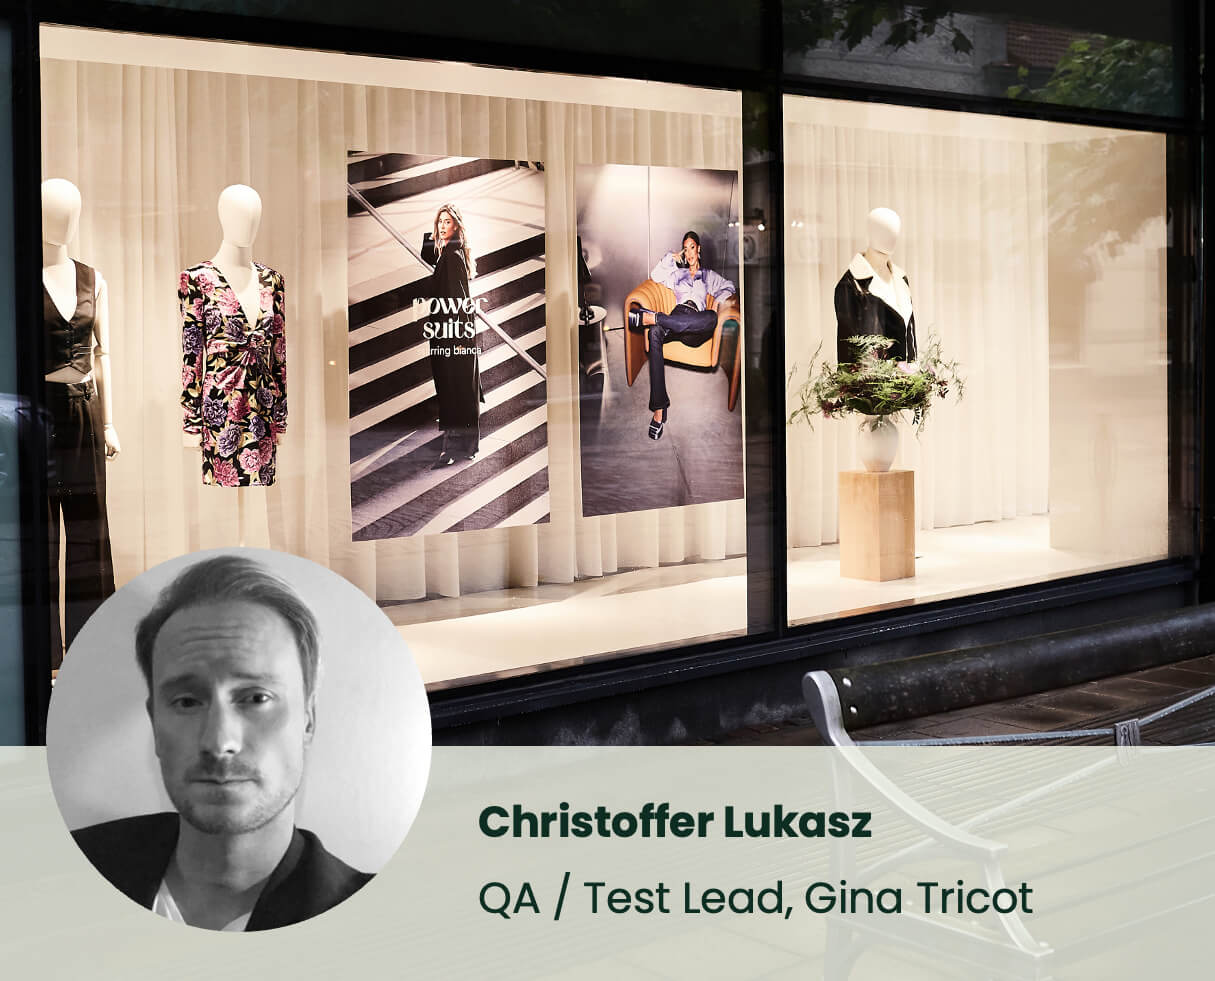 Gina Tricot Customer Case Study: download the case study